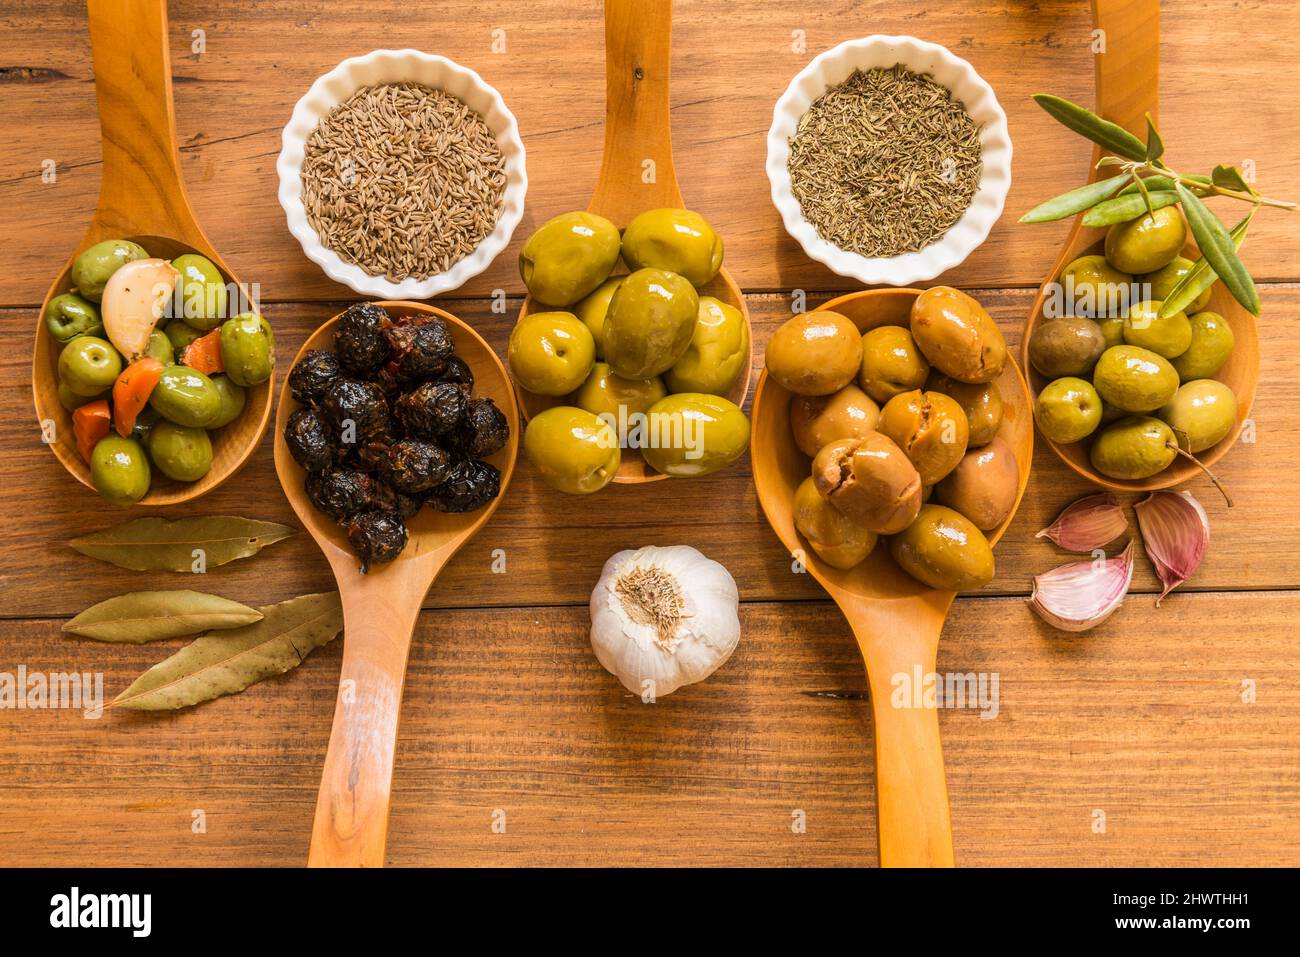 Still life with different varieties of olives, presented in wooden ladles, seasoned with different traditional dressings. Traditional homemade dressin Stock Photo